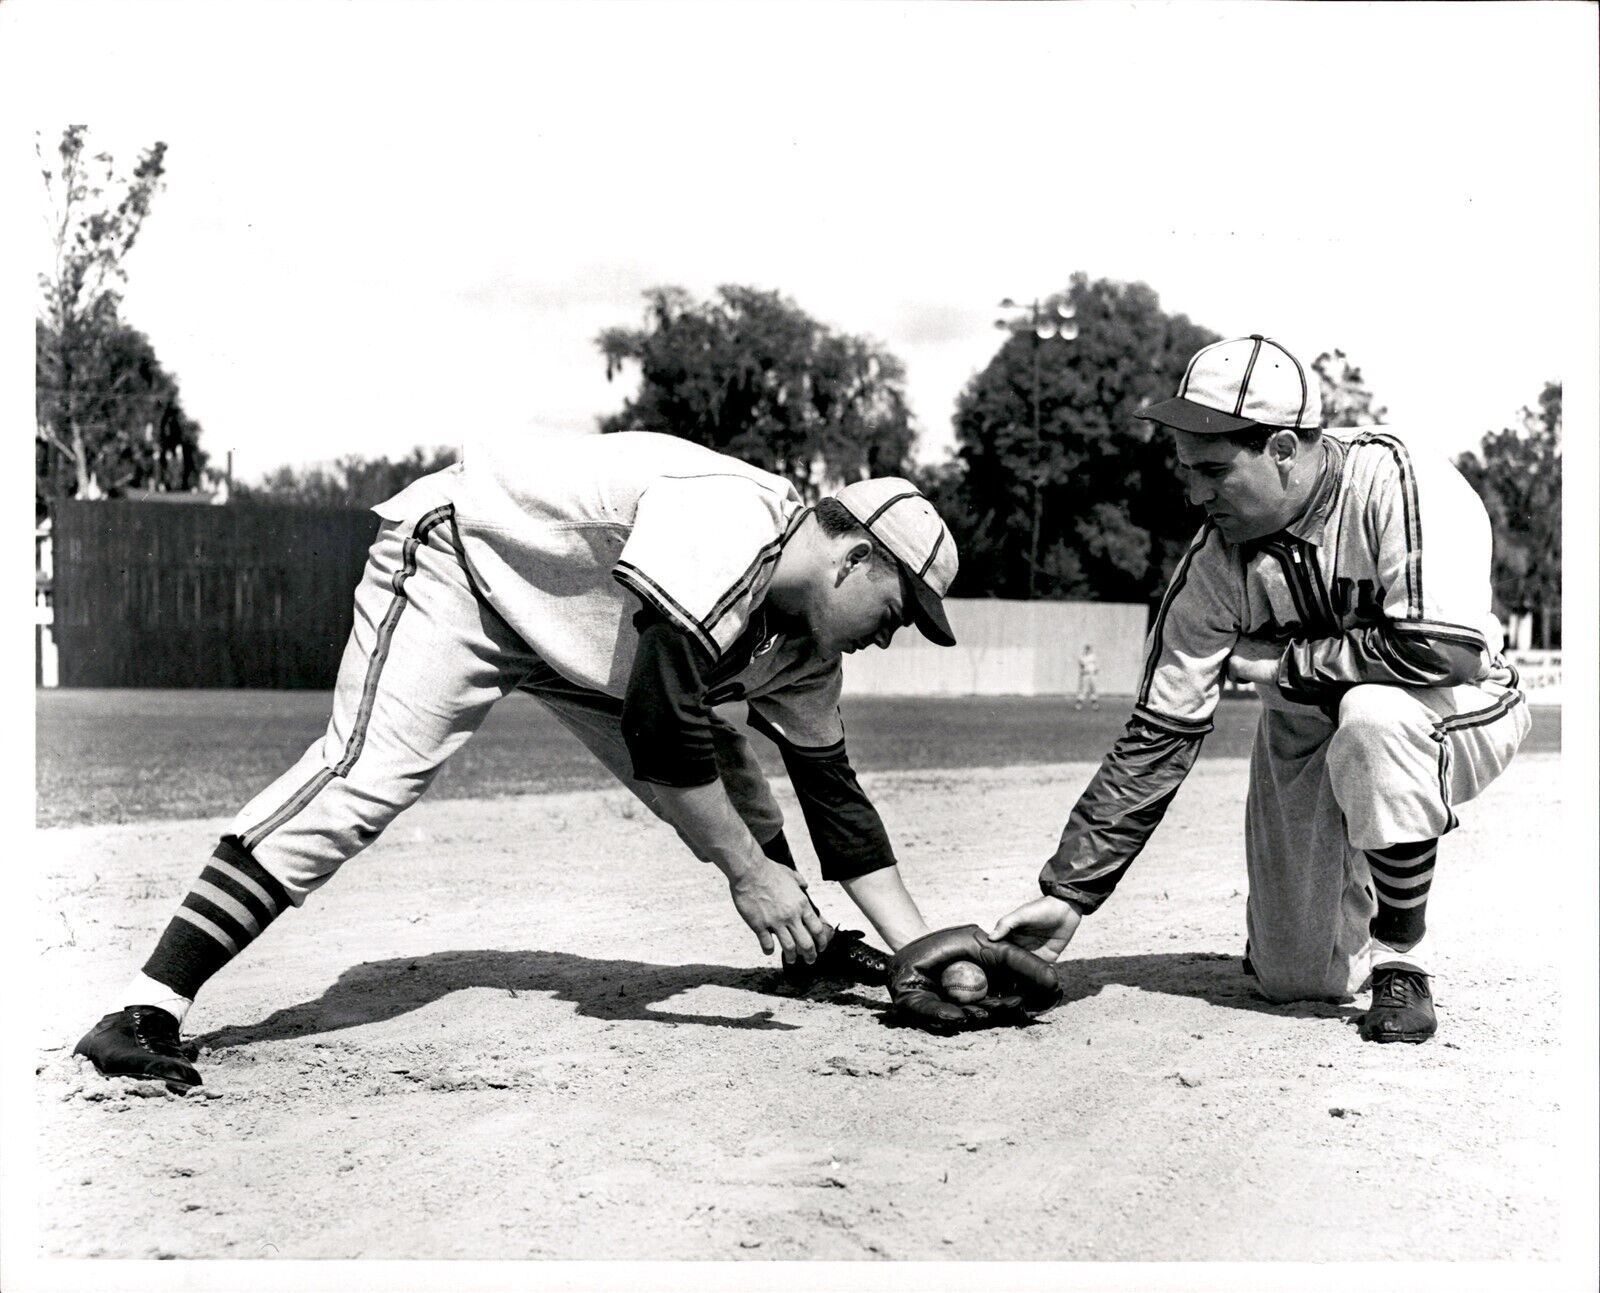 PF42 2nd Gen Restrike Photo ST LOUIS BROWNS ATHLETES PRACTICING CLASSIC BASEBALL